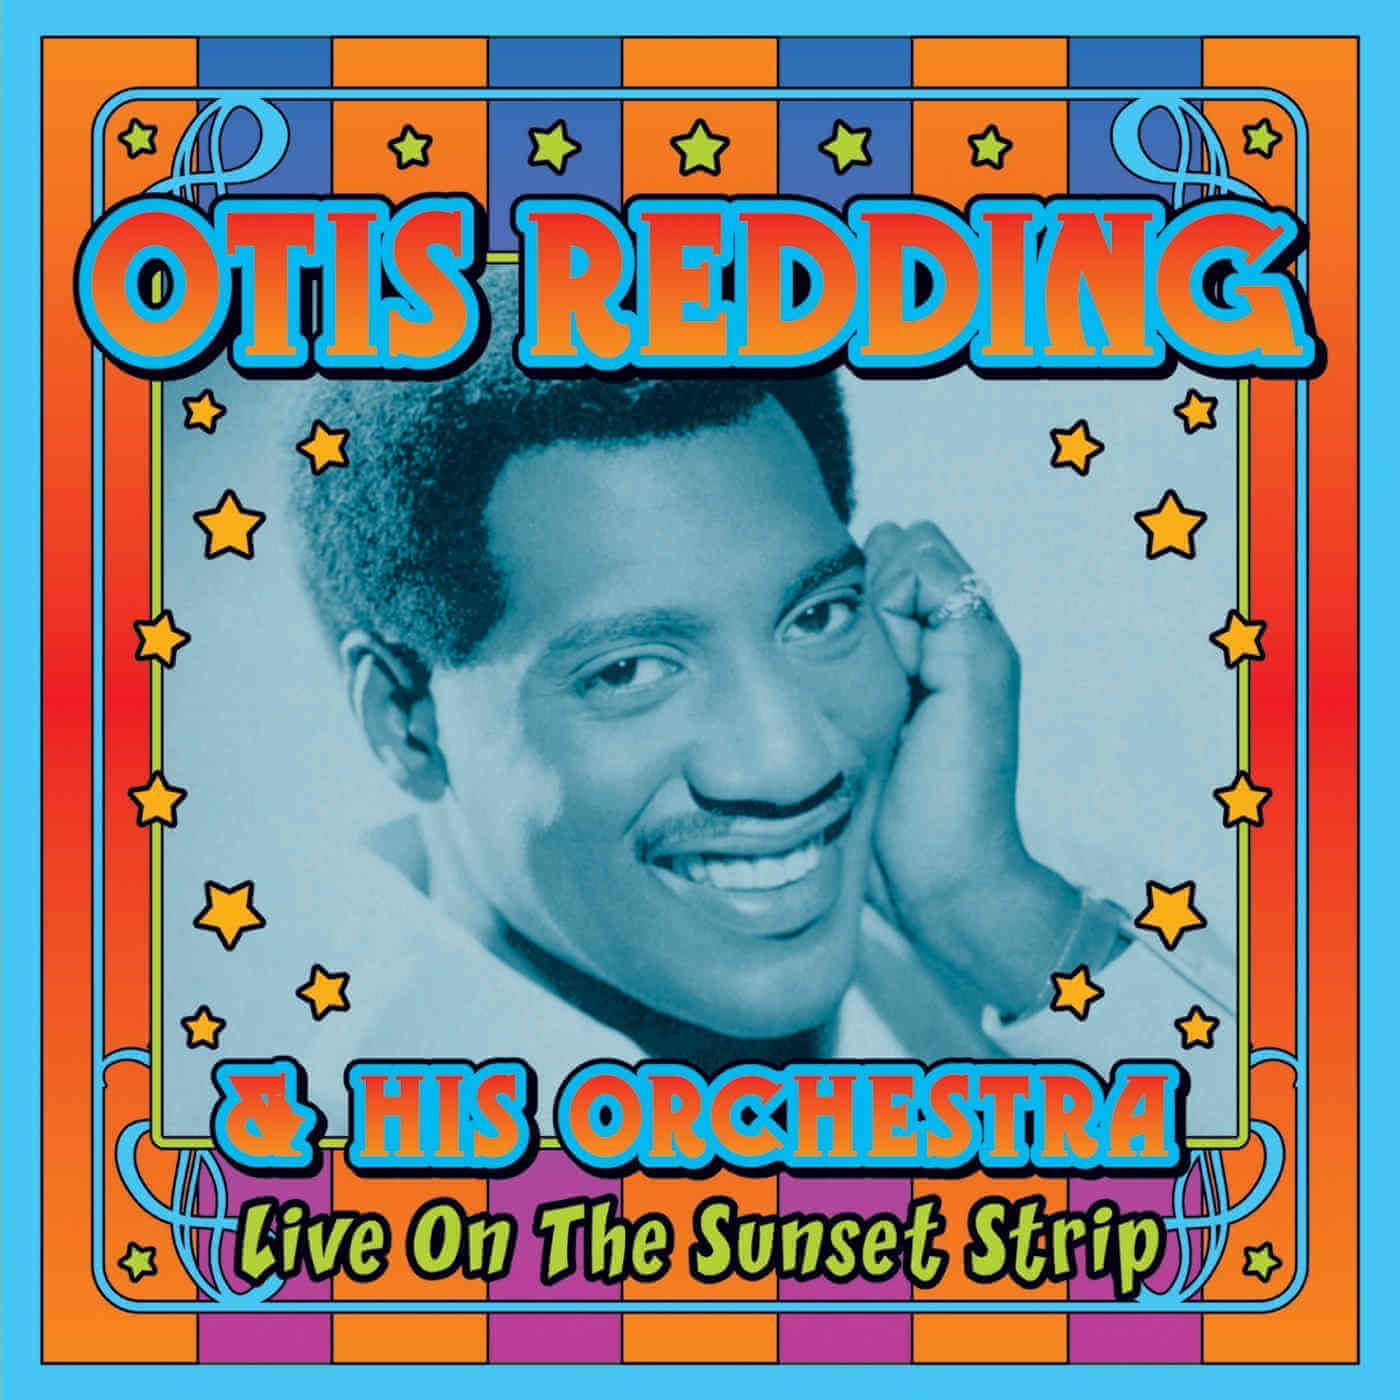 Otis Redding's Best Live Albums, to Listen and what about Vinyl?